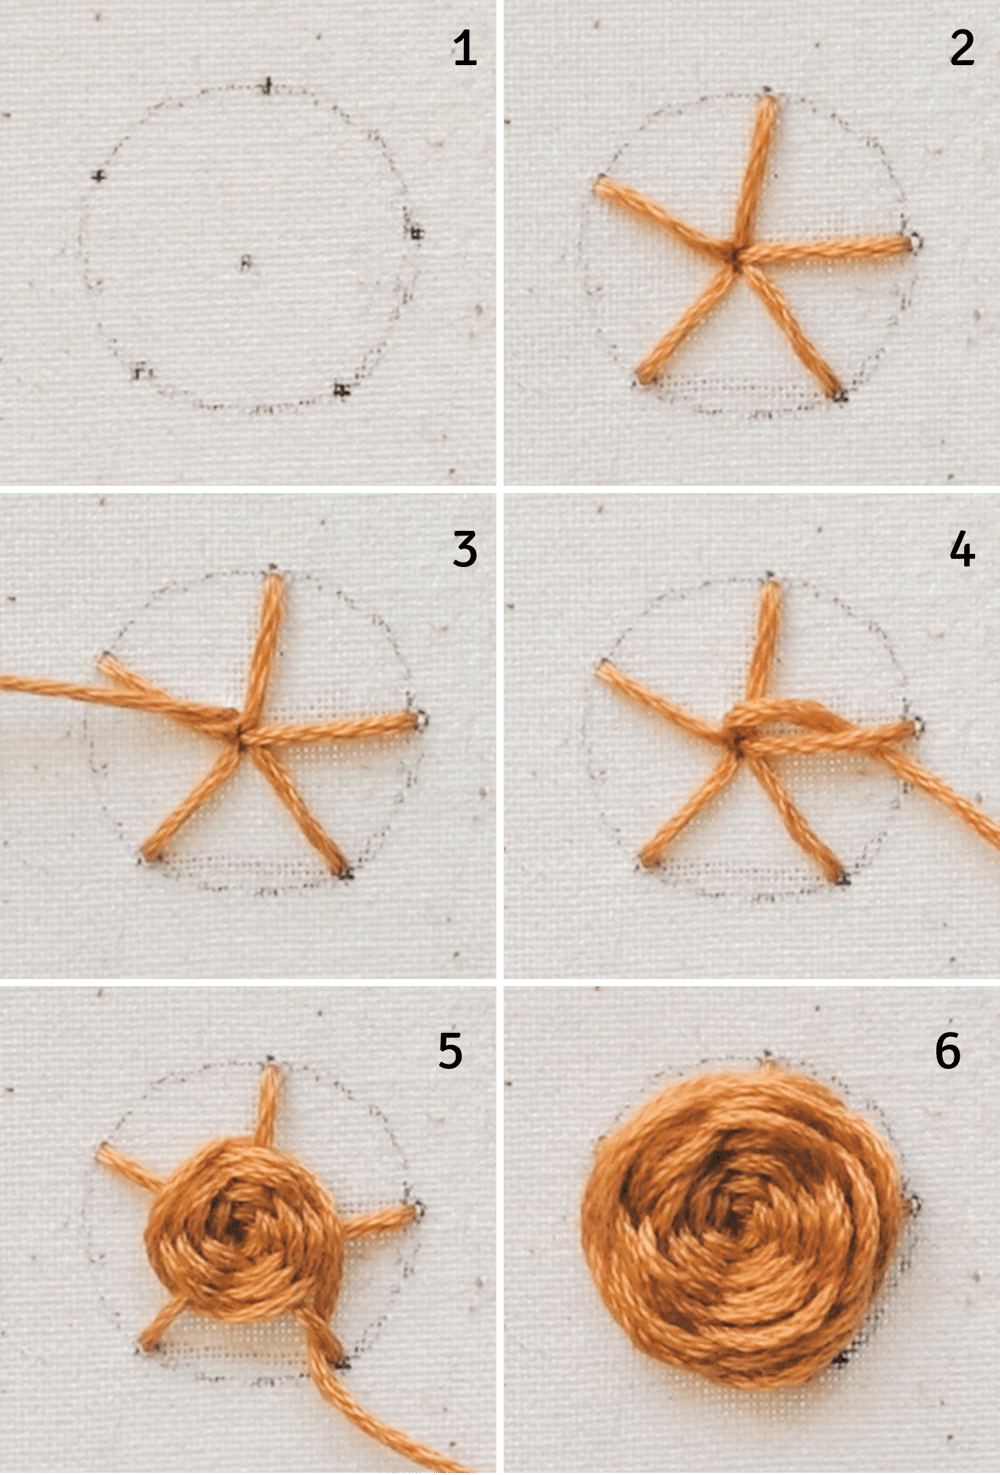 how to woven rose stitch Woven Wheel stitch, also known aWoven Rose or Woven Spider Wheel stitch embroidery